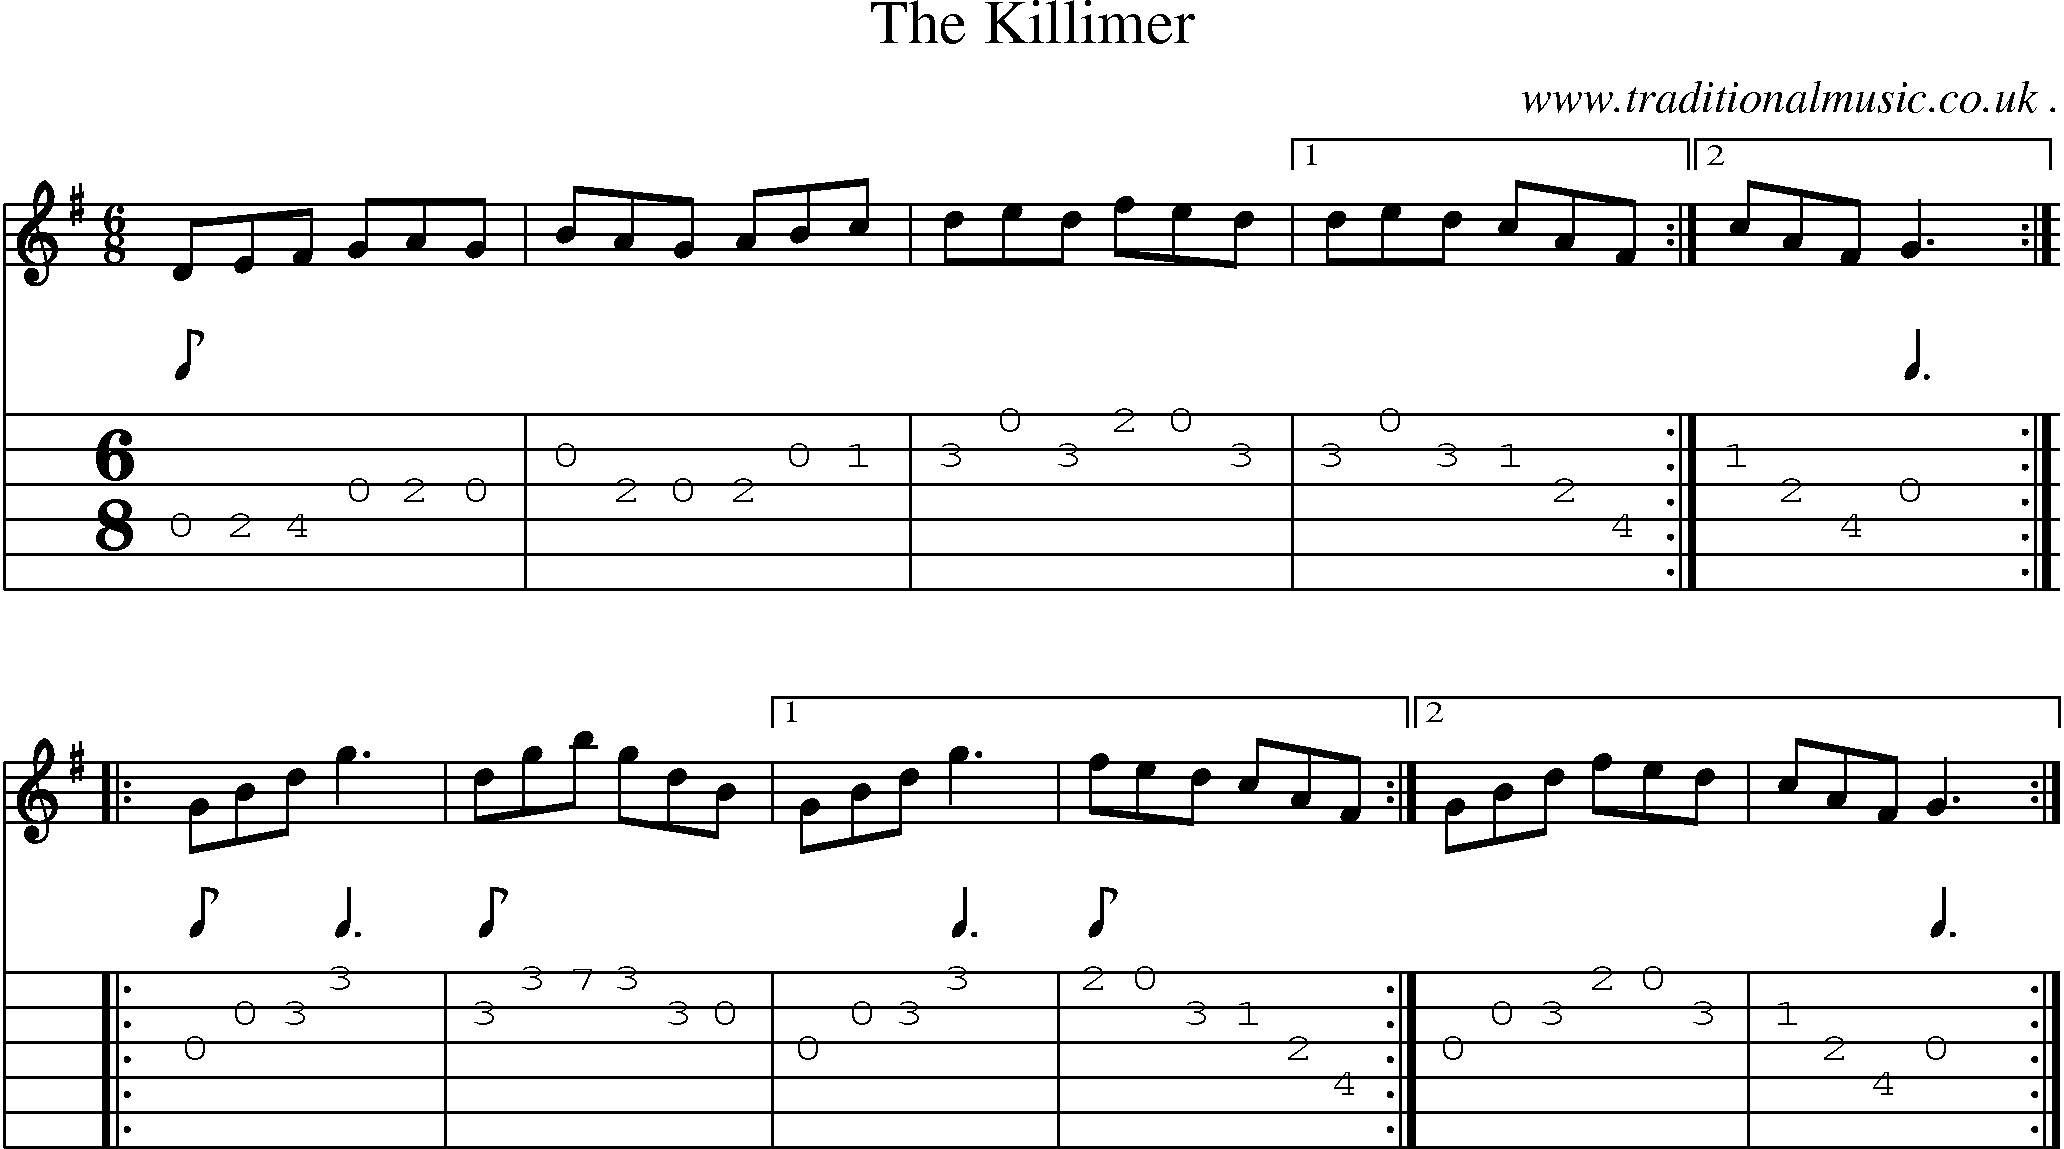 Sheet-Music and Guitar Tabs for The Killimer